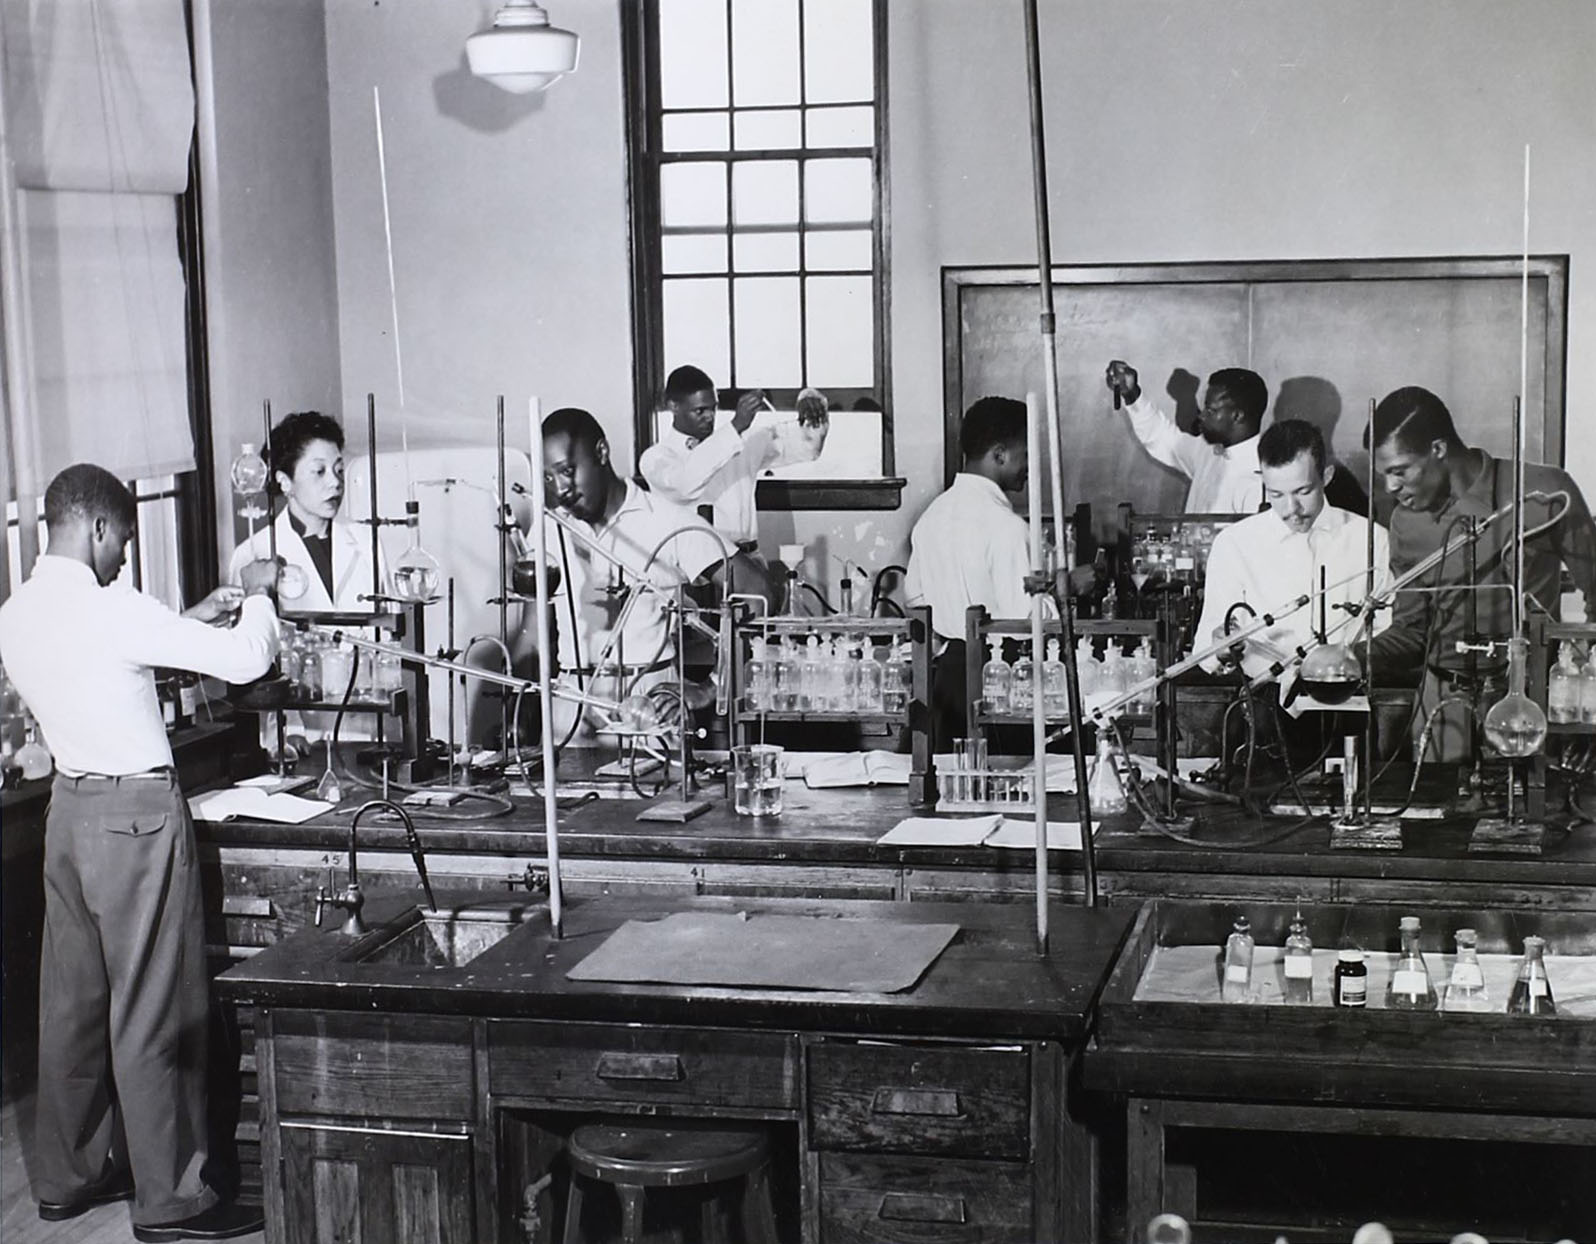 Dr. Harriet Williams (far left) presides over her chemistry lab in the 1940s